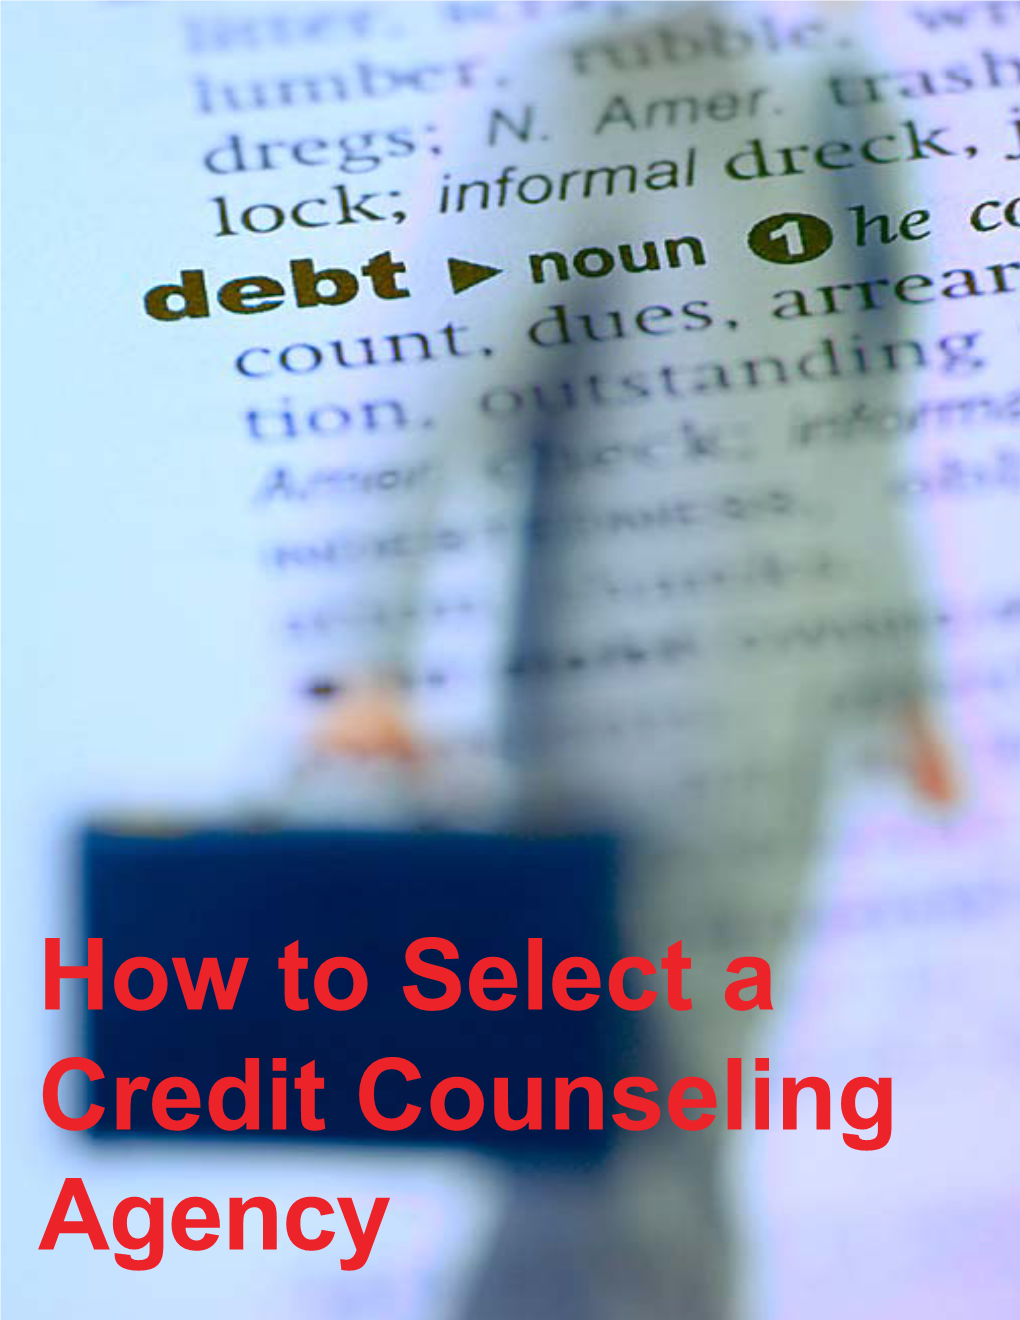 How to Select a Credit Counseling Agency “The Credit Counseling Industry’S Largest Trade Association”